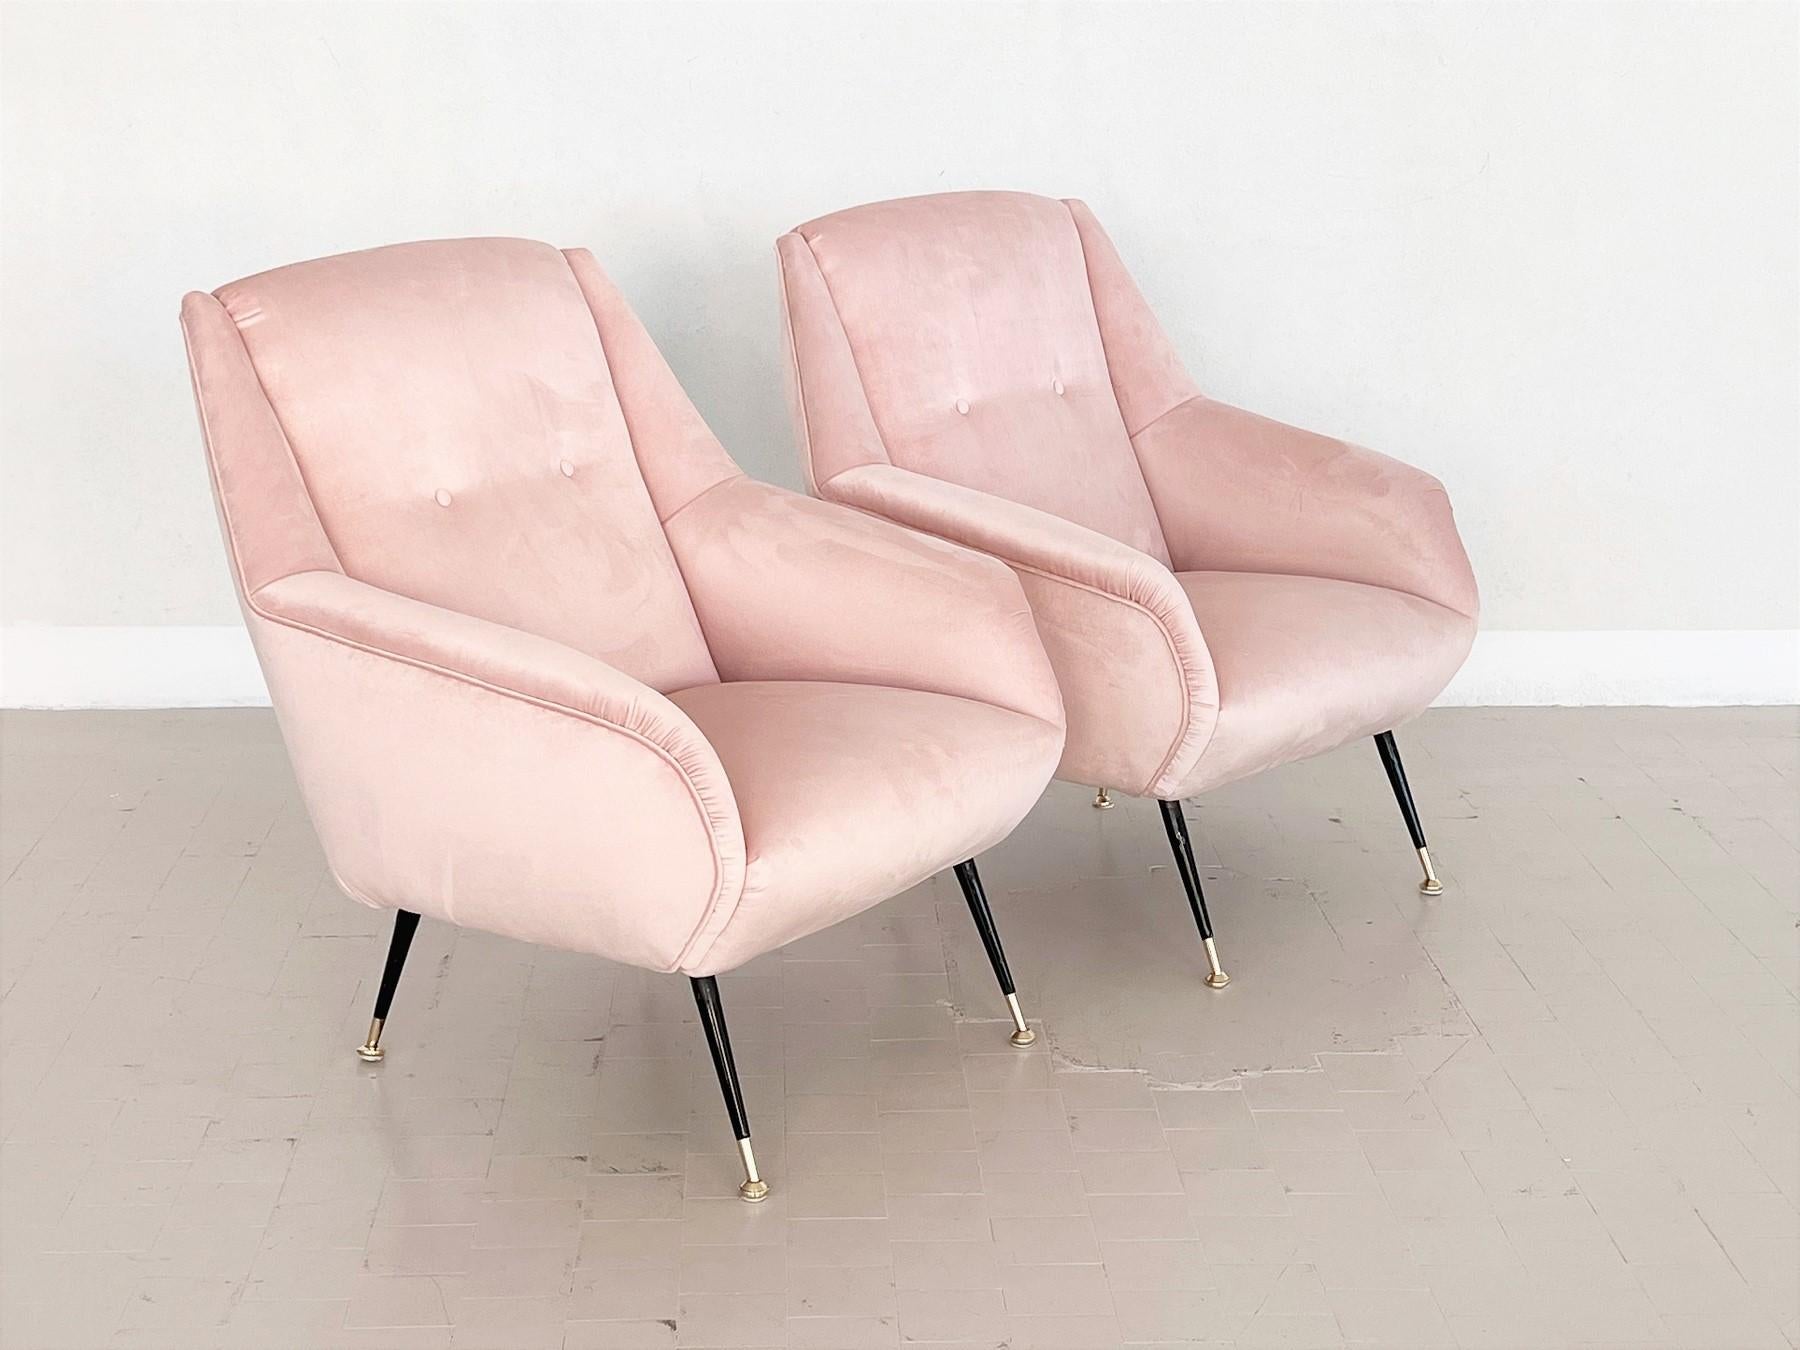 Italian Midcentury Armchairs in Soft Pink Velvet and Brass Tips, 1950s For Sale 8